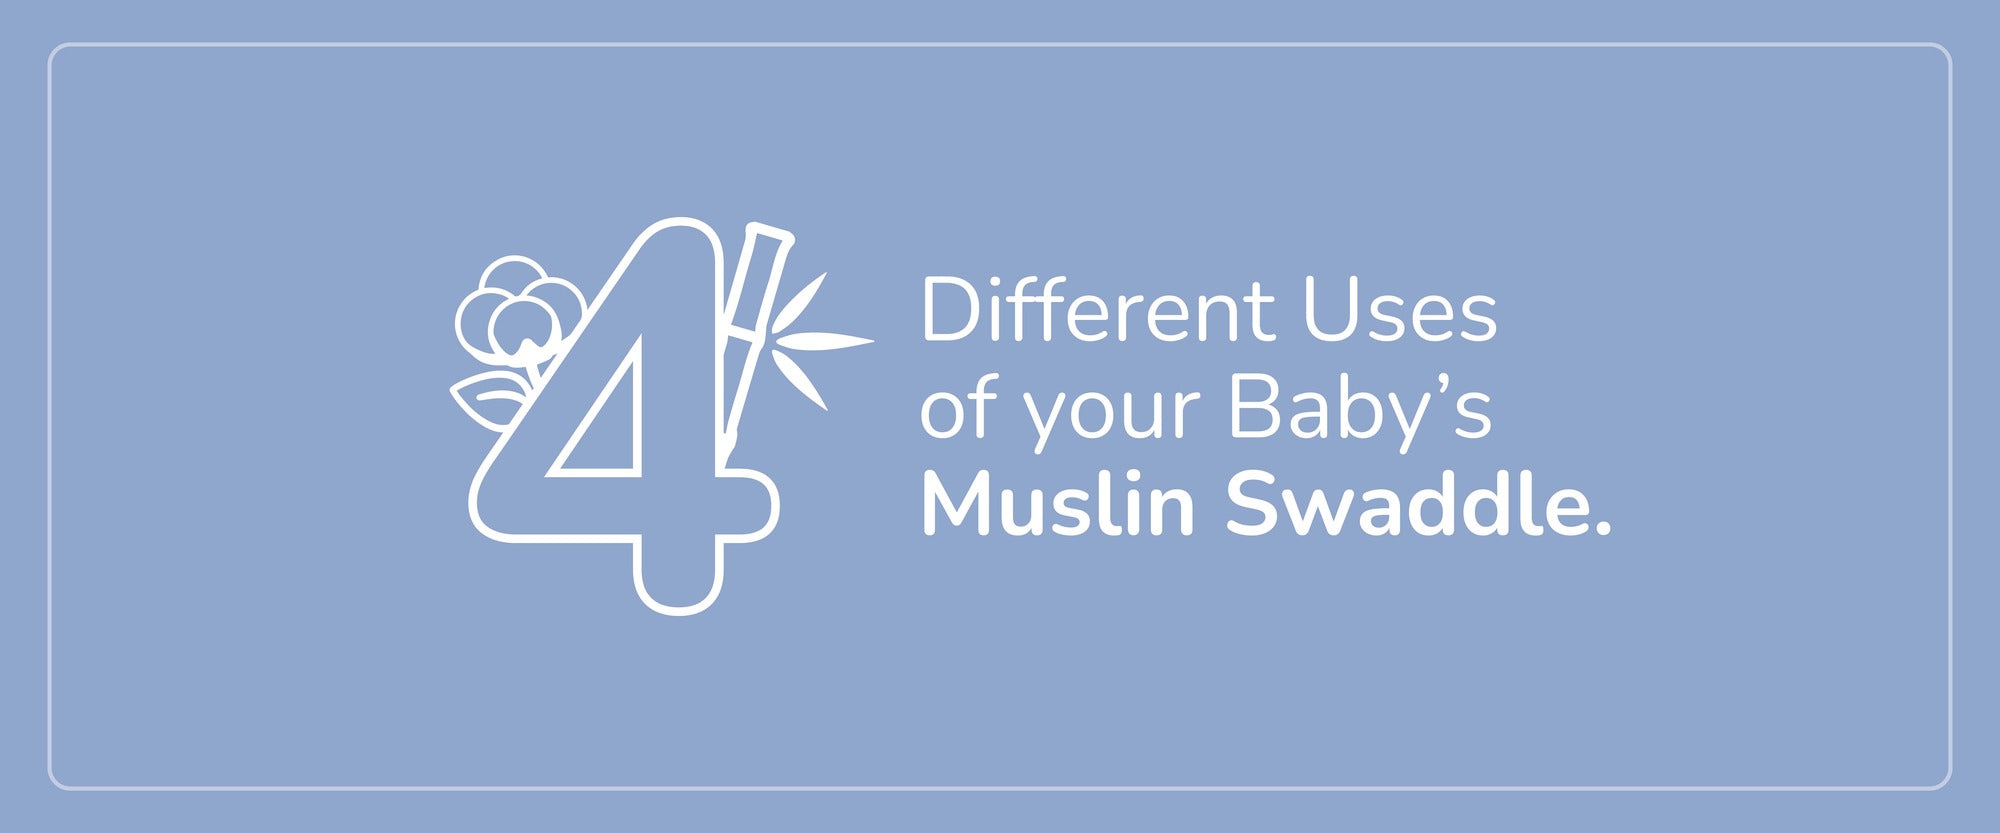 4  Different Uses of your Baby's Muslin Swaddle